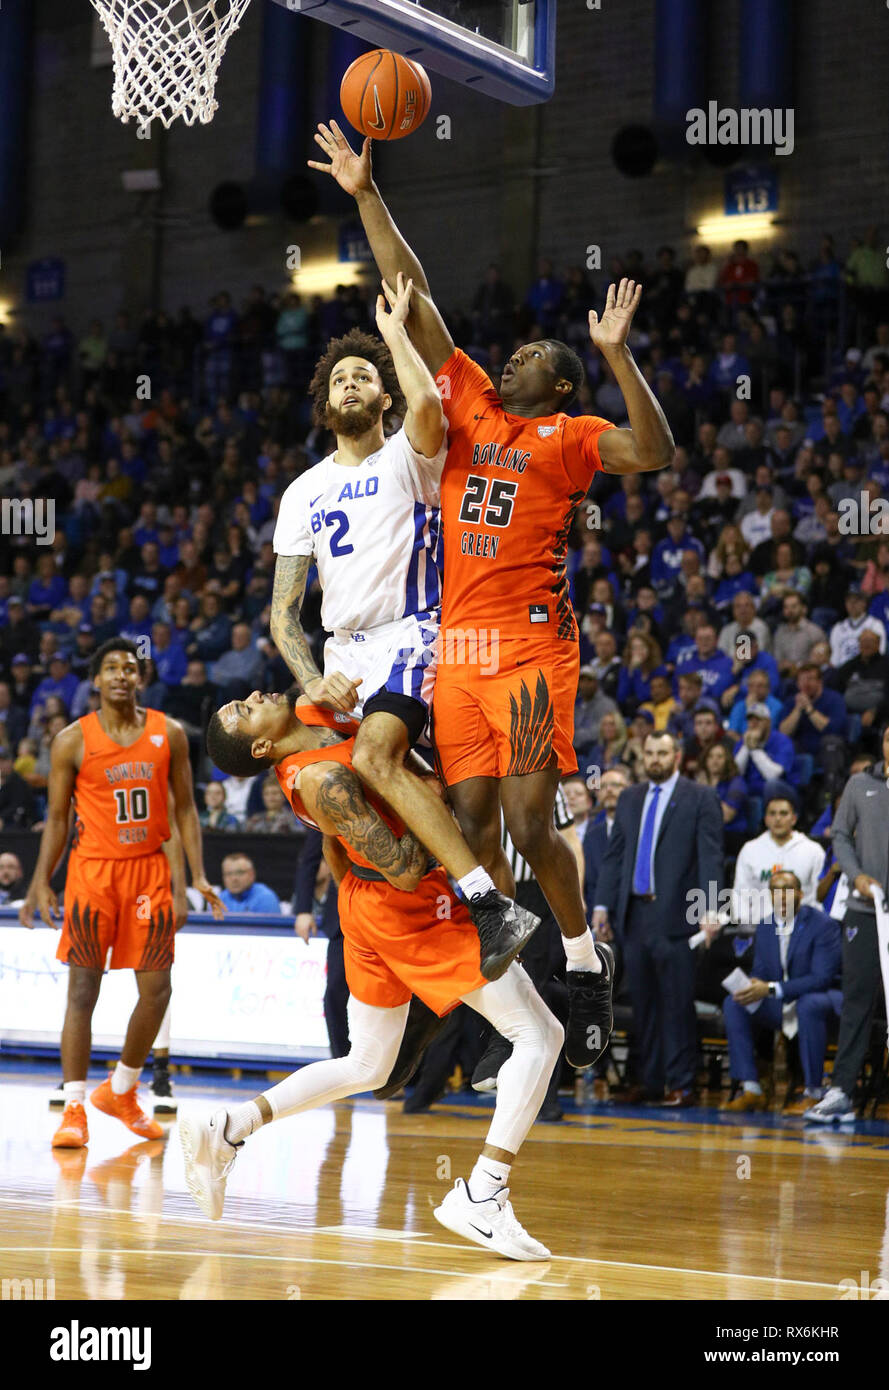 New York, USA. 8th Mar 2019. Mar 08, 2019: Buffalo Bulls guard Jeremy Harris (2) shoots the ball under pressure from Bowling Green Falcons forward Daeqwon Plowden (25) and guard Michael Laster (0) during the second half of play in the NCAA Basketball game between the Bowling Green Falcons and Buffalo Bulls at Alumni Arena in Amherst, N.Y. (Nicholas T. LoVerde/Cal Sport Media) Credit: Cal Sport Media/Alamy Live News Stock Photo